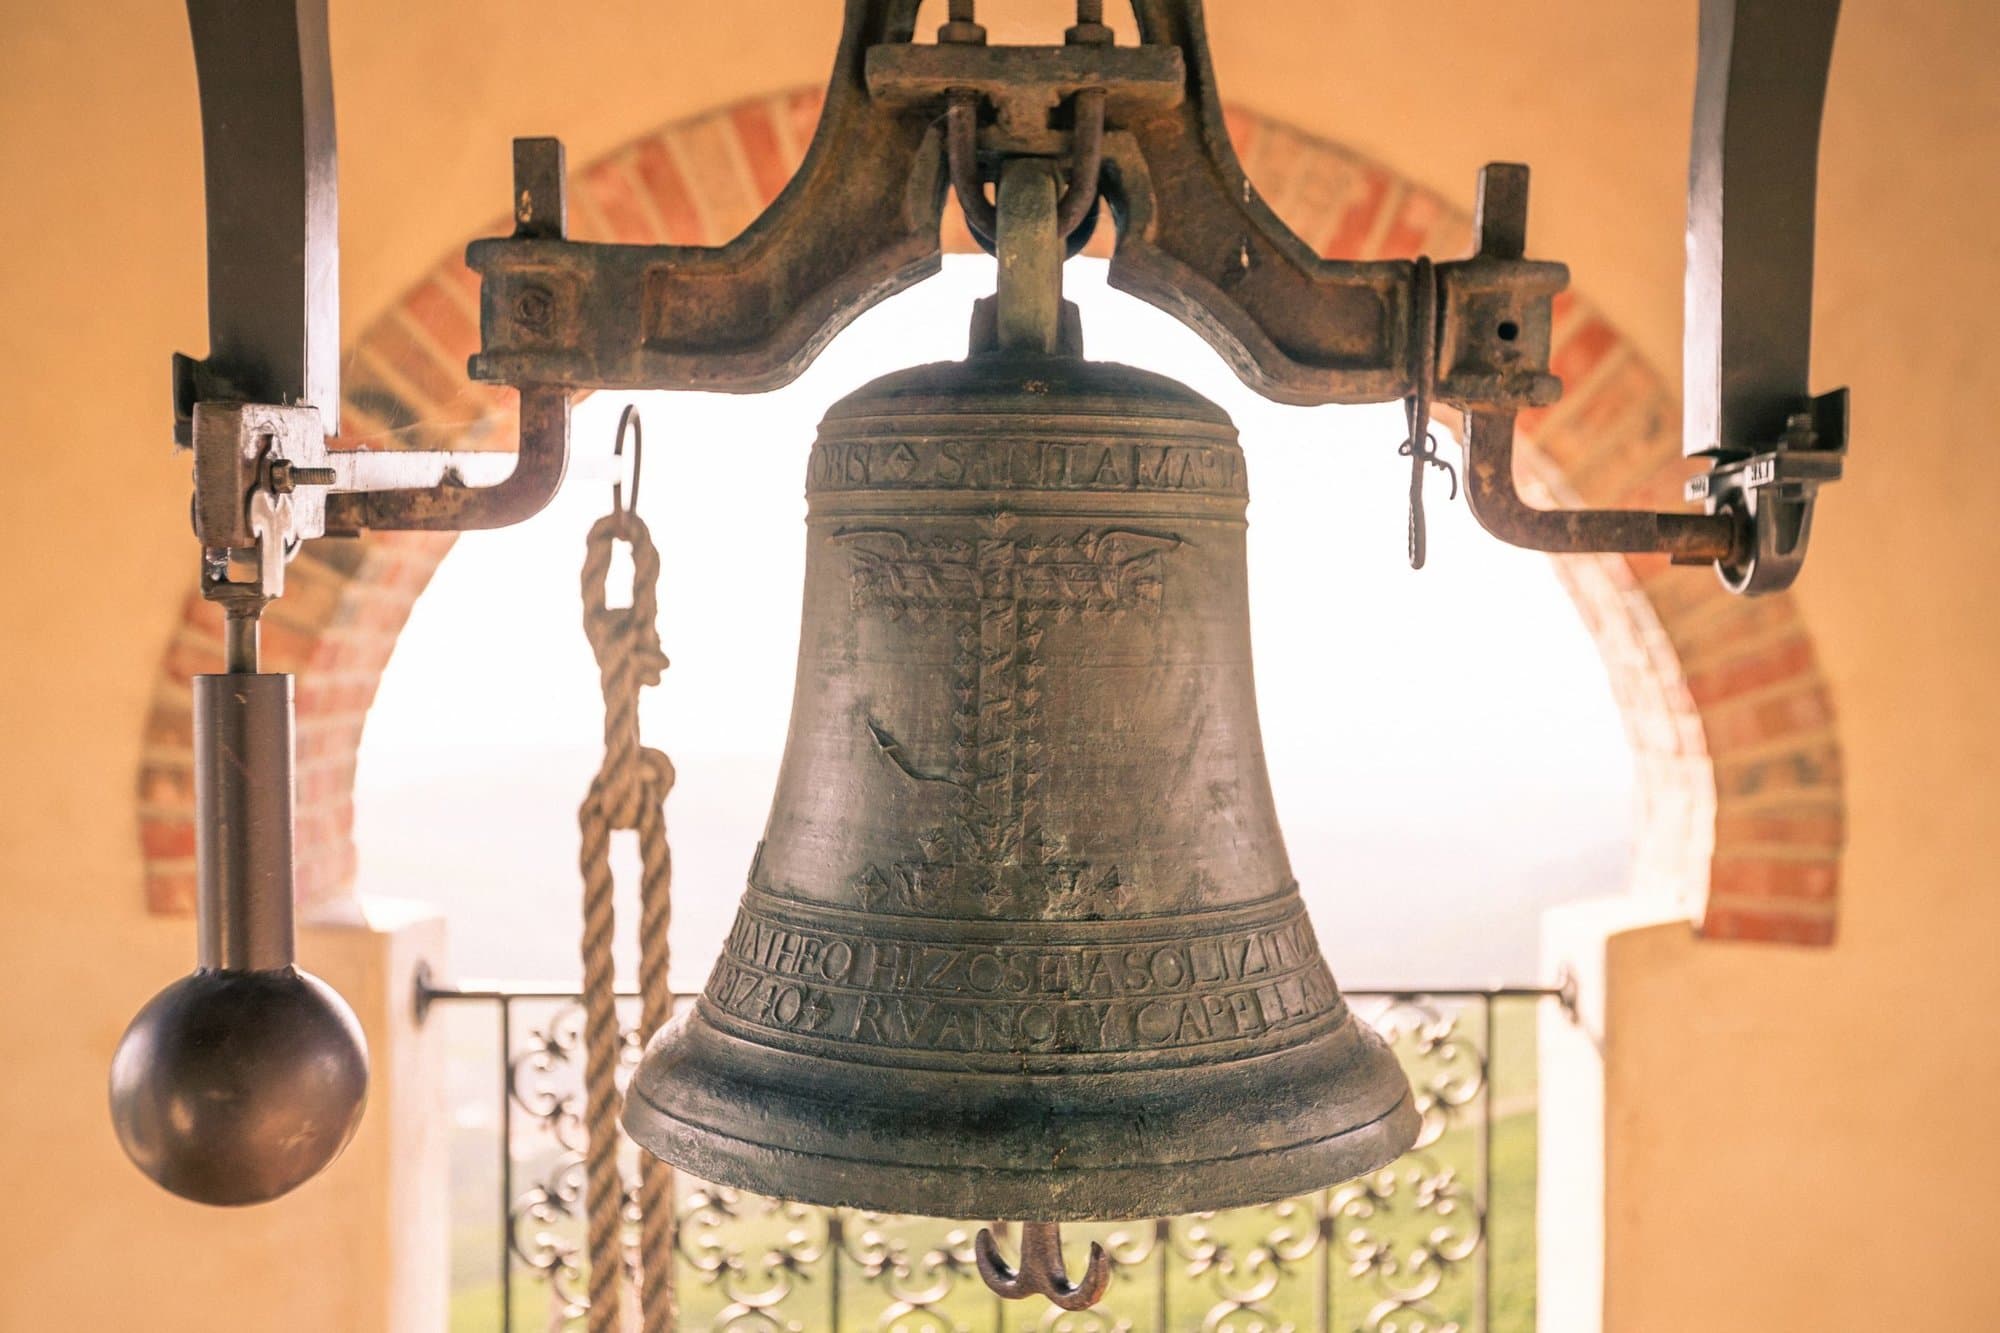 Close up of the DAOU bell in the bell tower on the estate